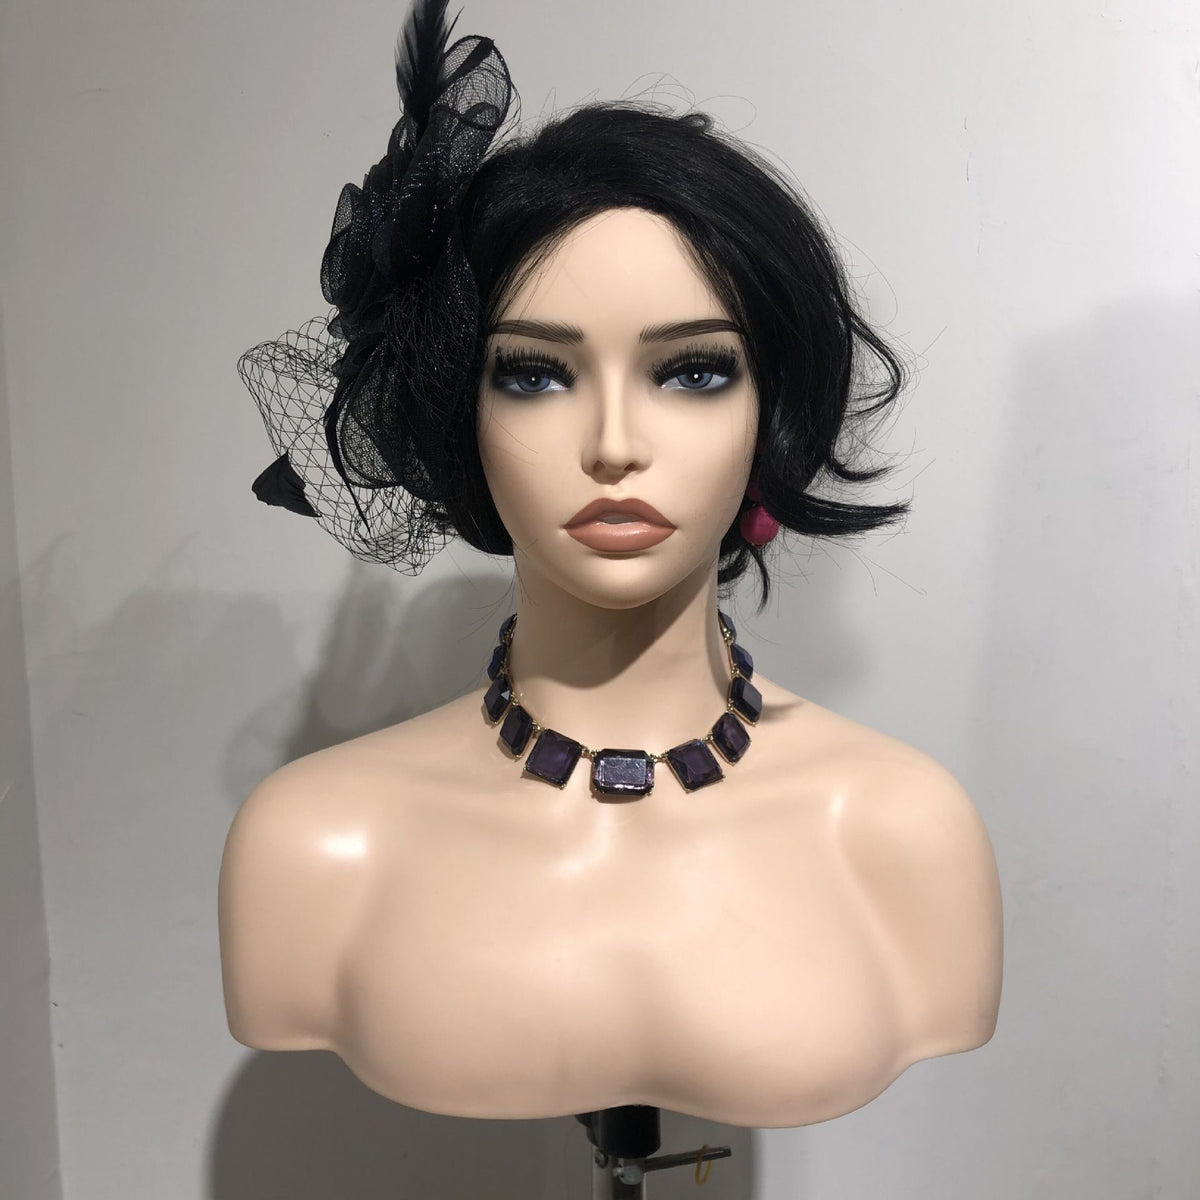 Half White Skin Mannequin Head Wig Model with Earrings for Display